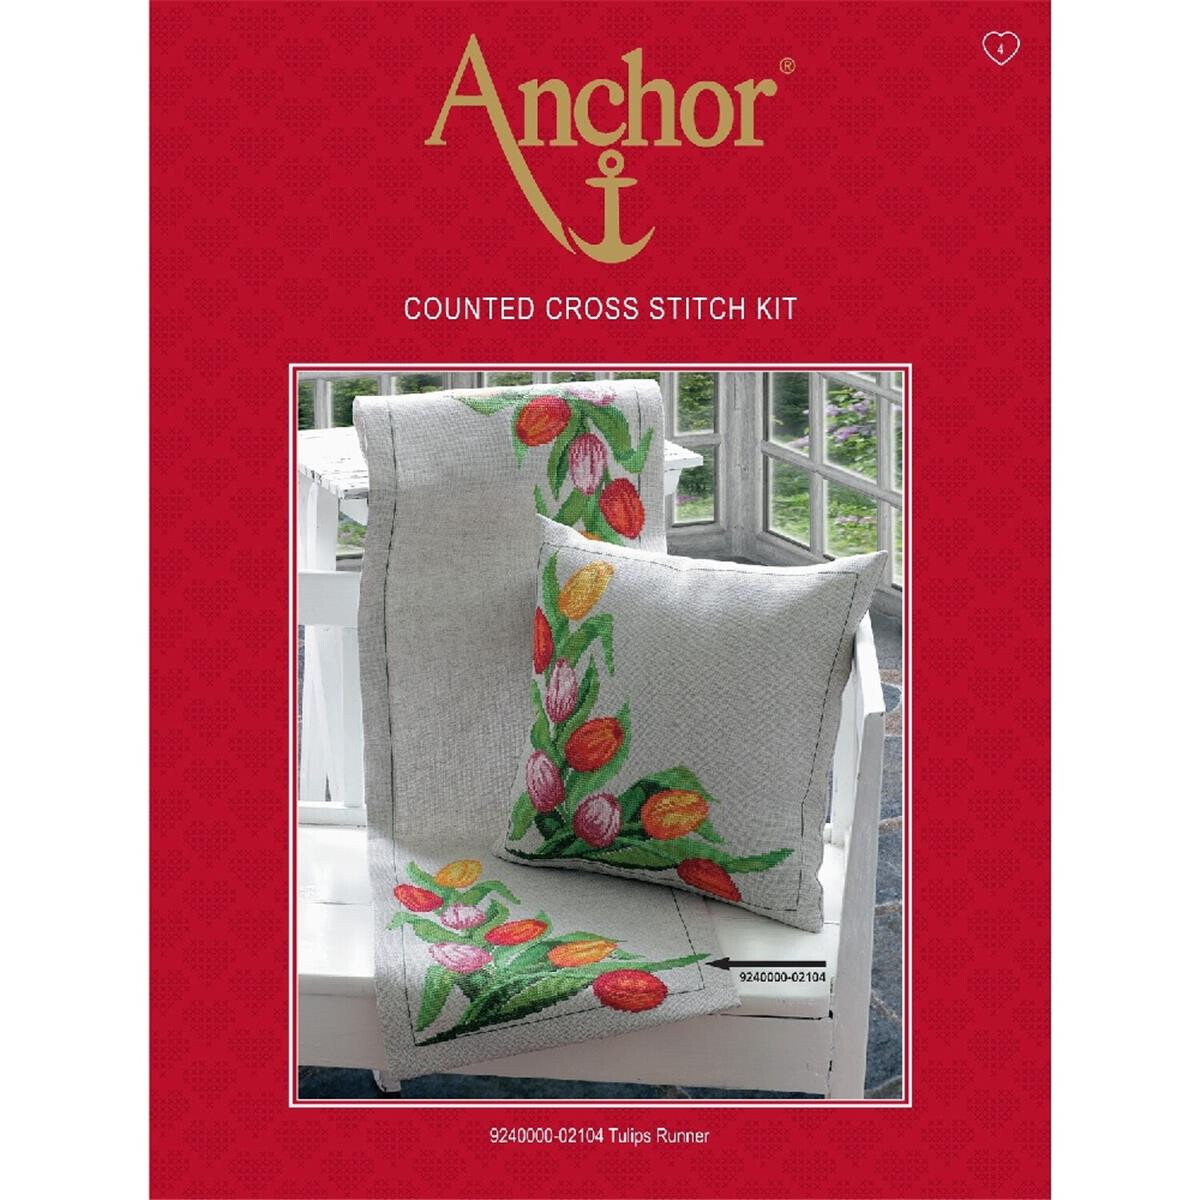 Anchor stamped Cross Stitch kit Table runner...